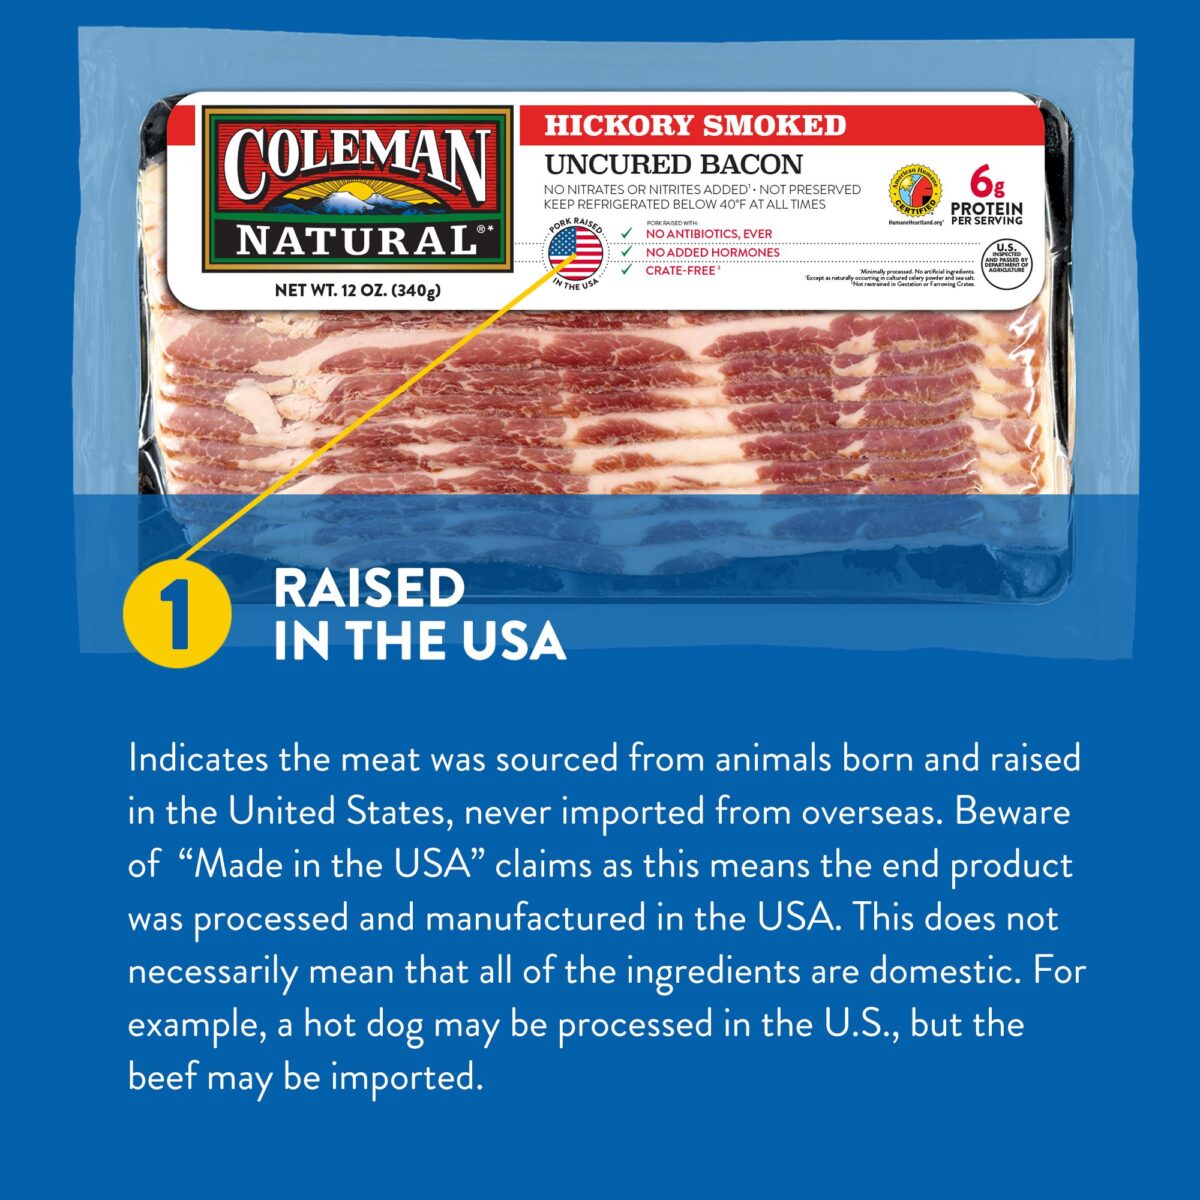 Coleman Natural meat label showing raised in the USA.